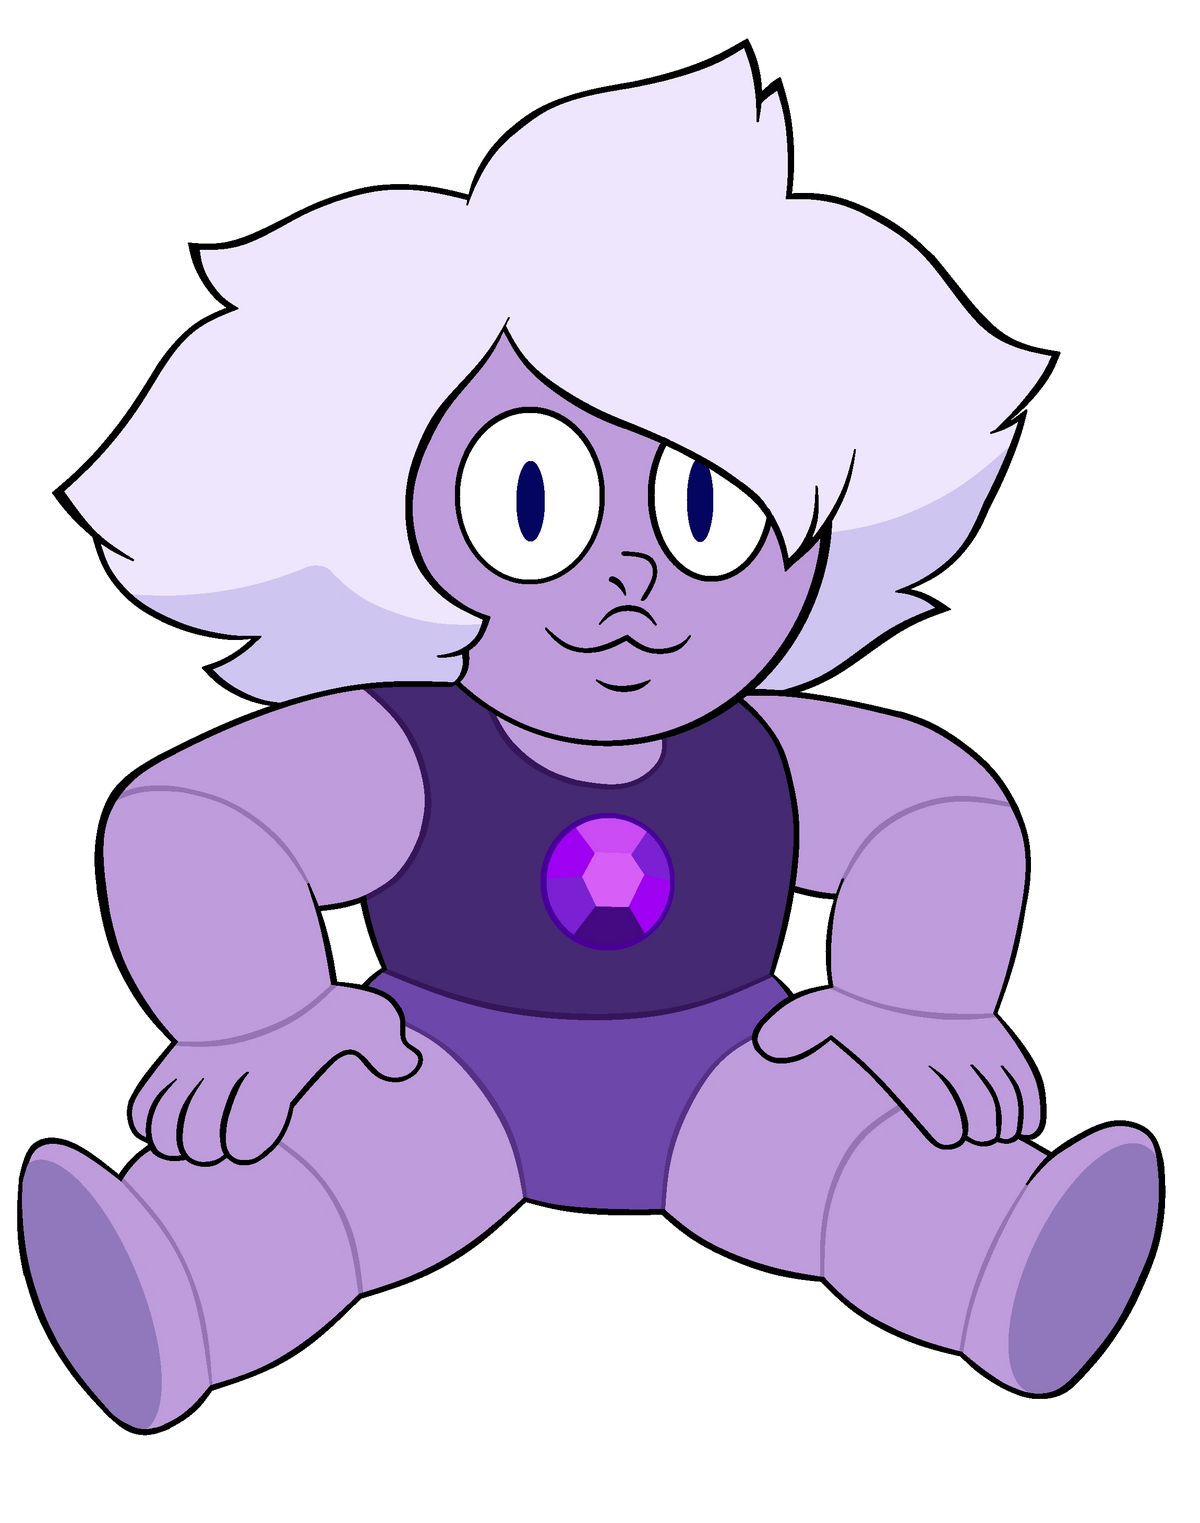 Steven Universe (character), Character Profile Wikia